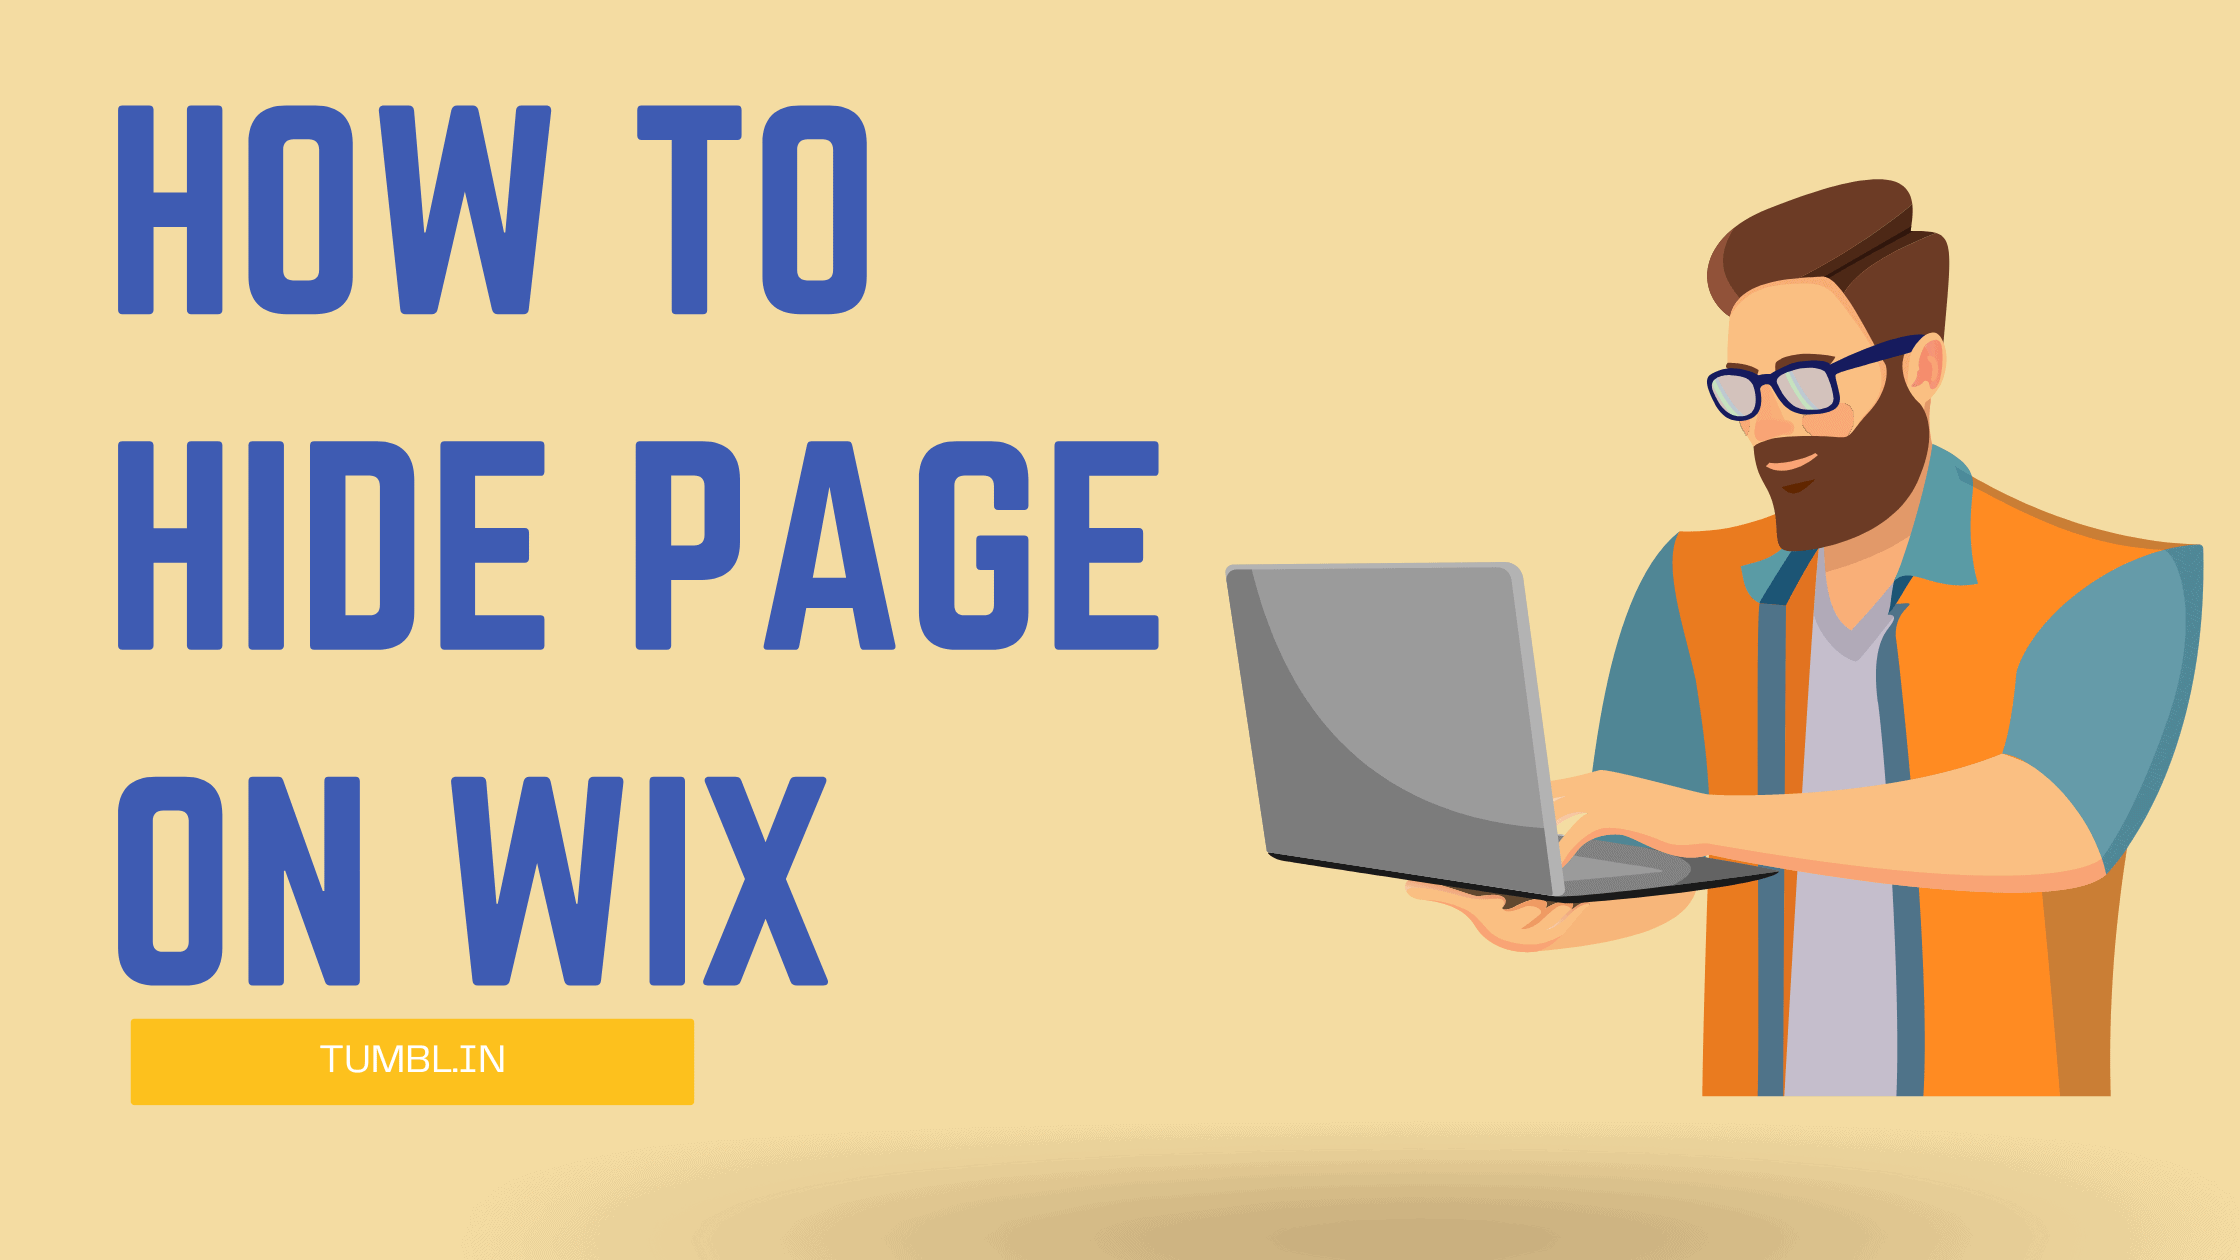 How to Hide Page on